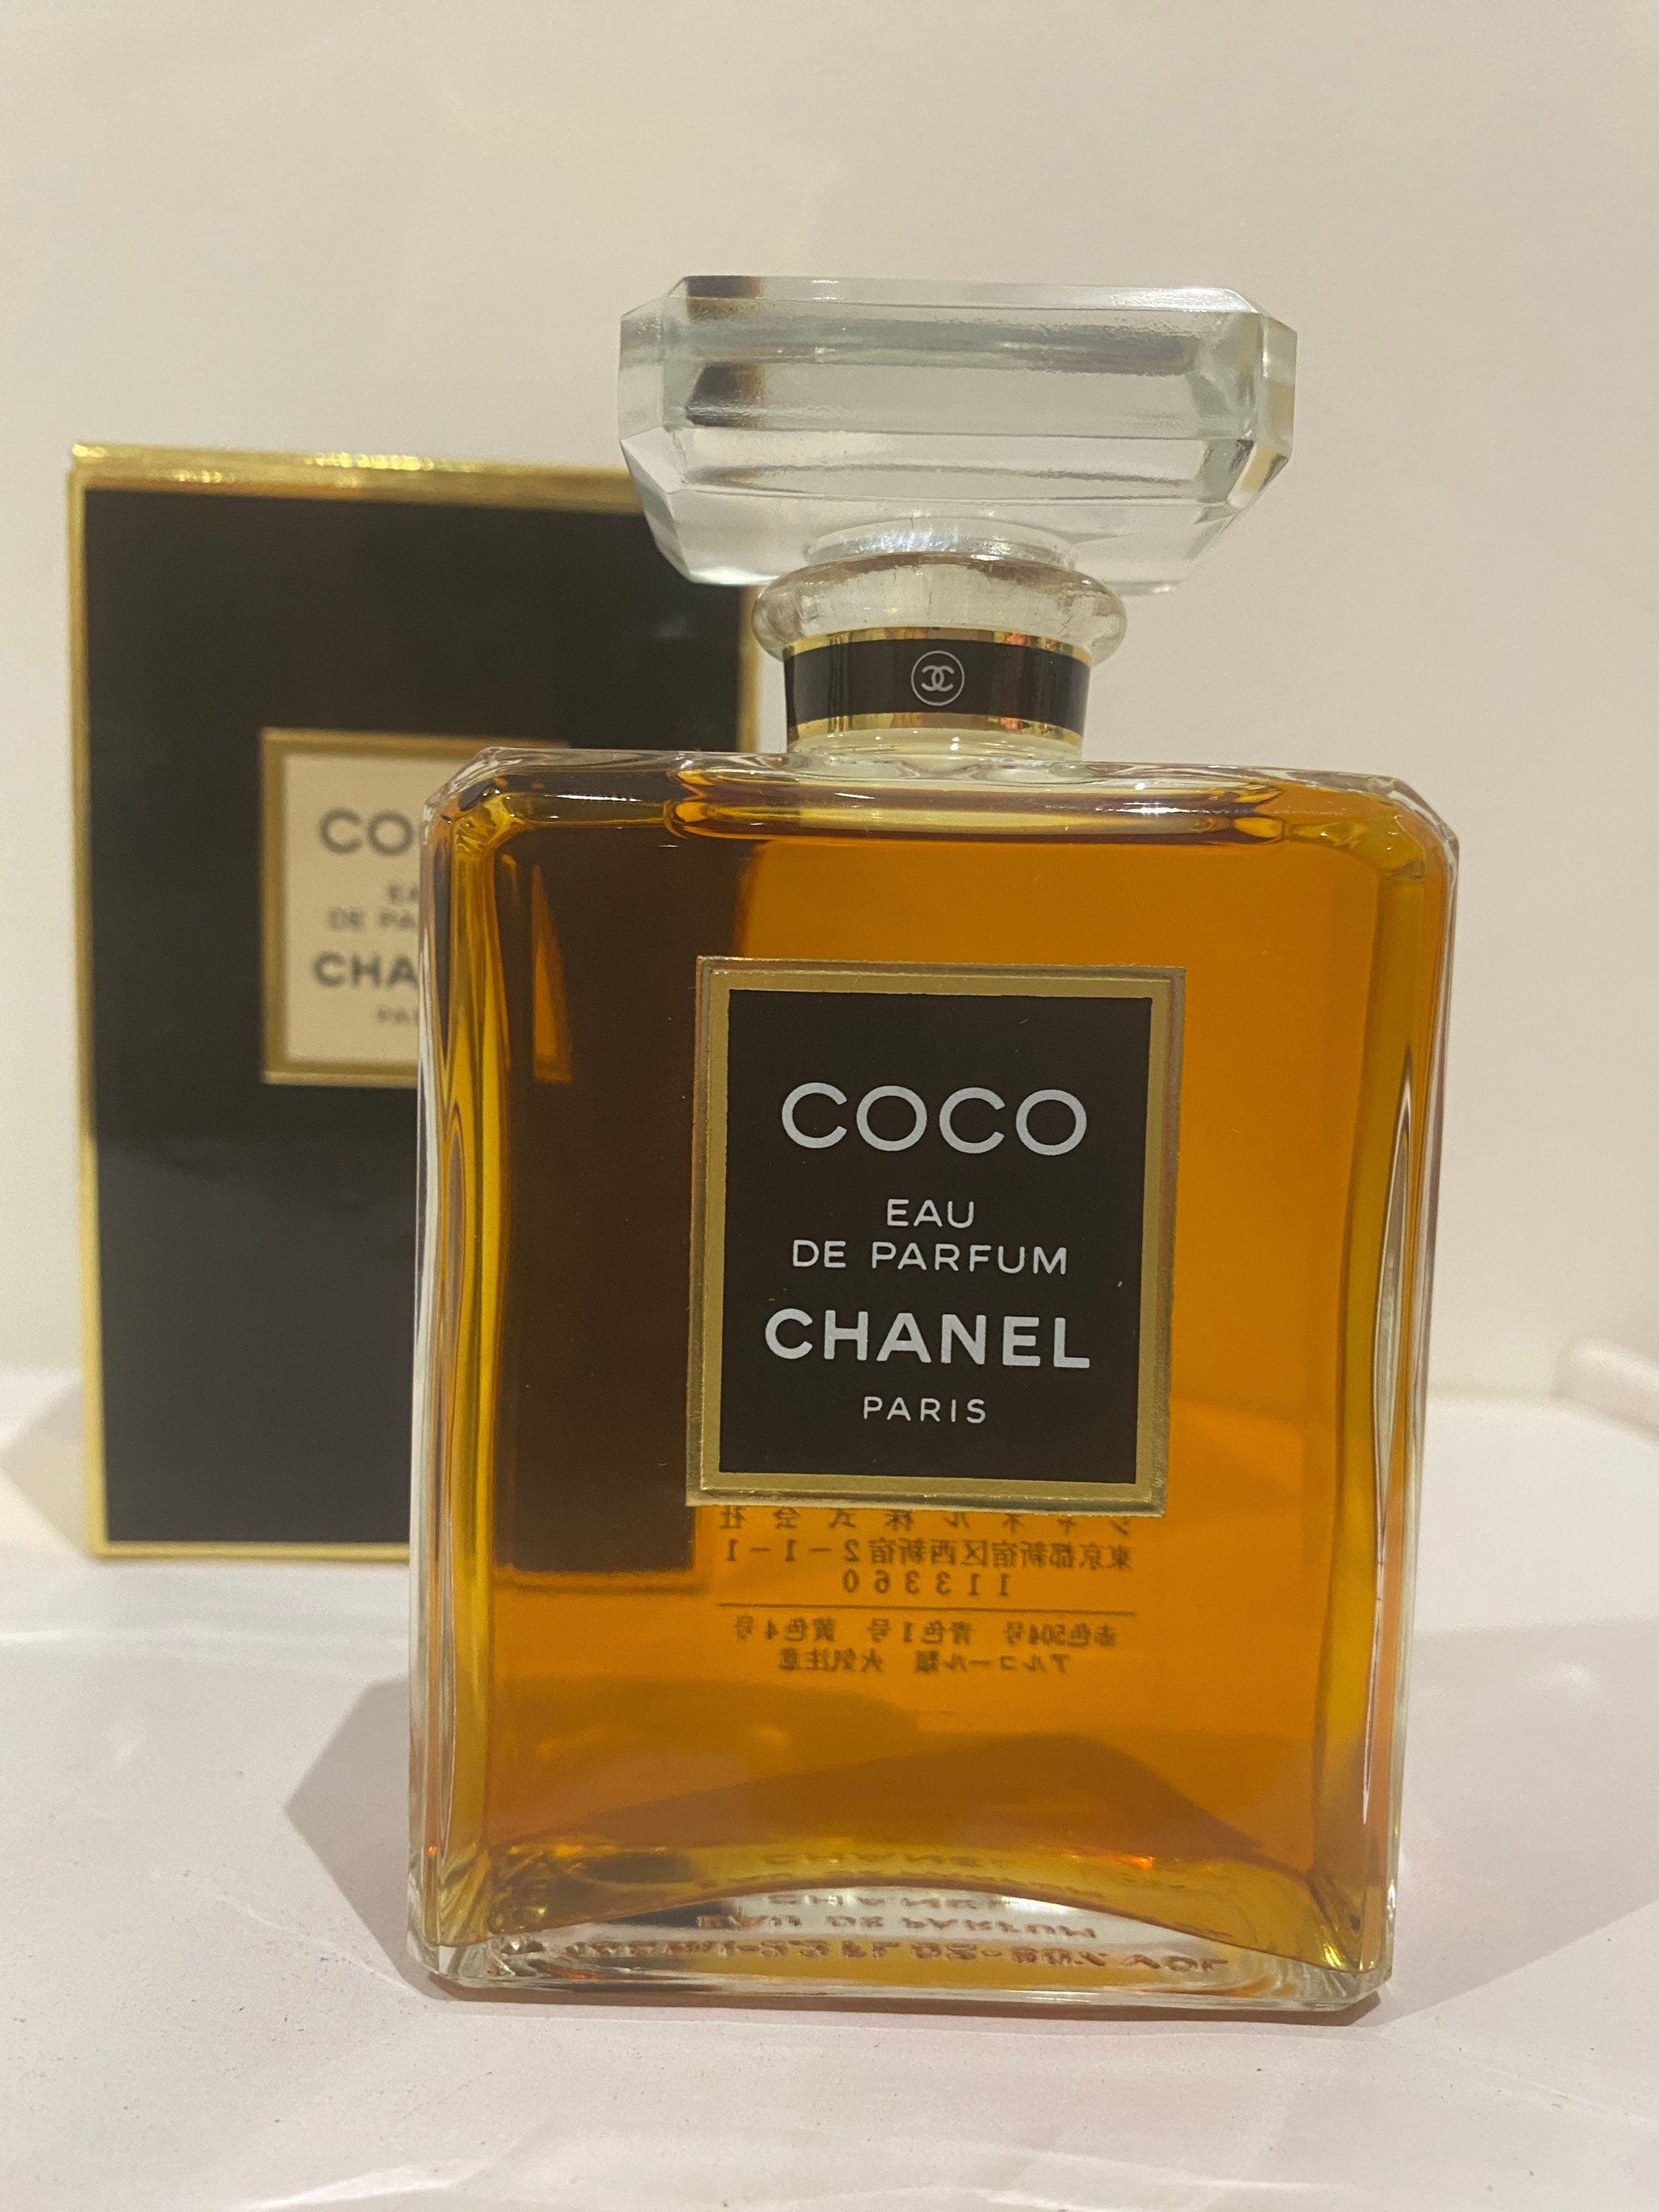 Chanel Perfume Bottles: Coco by Chanel c1984